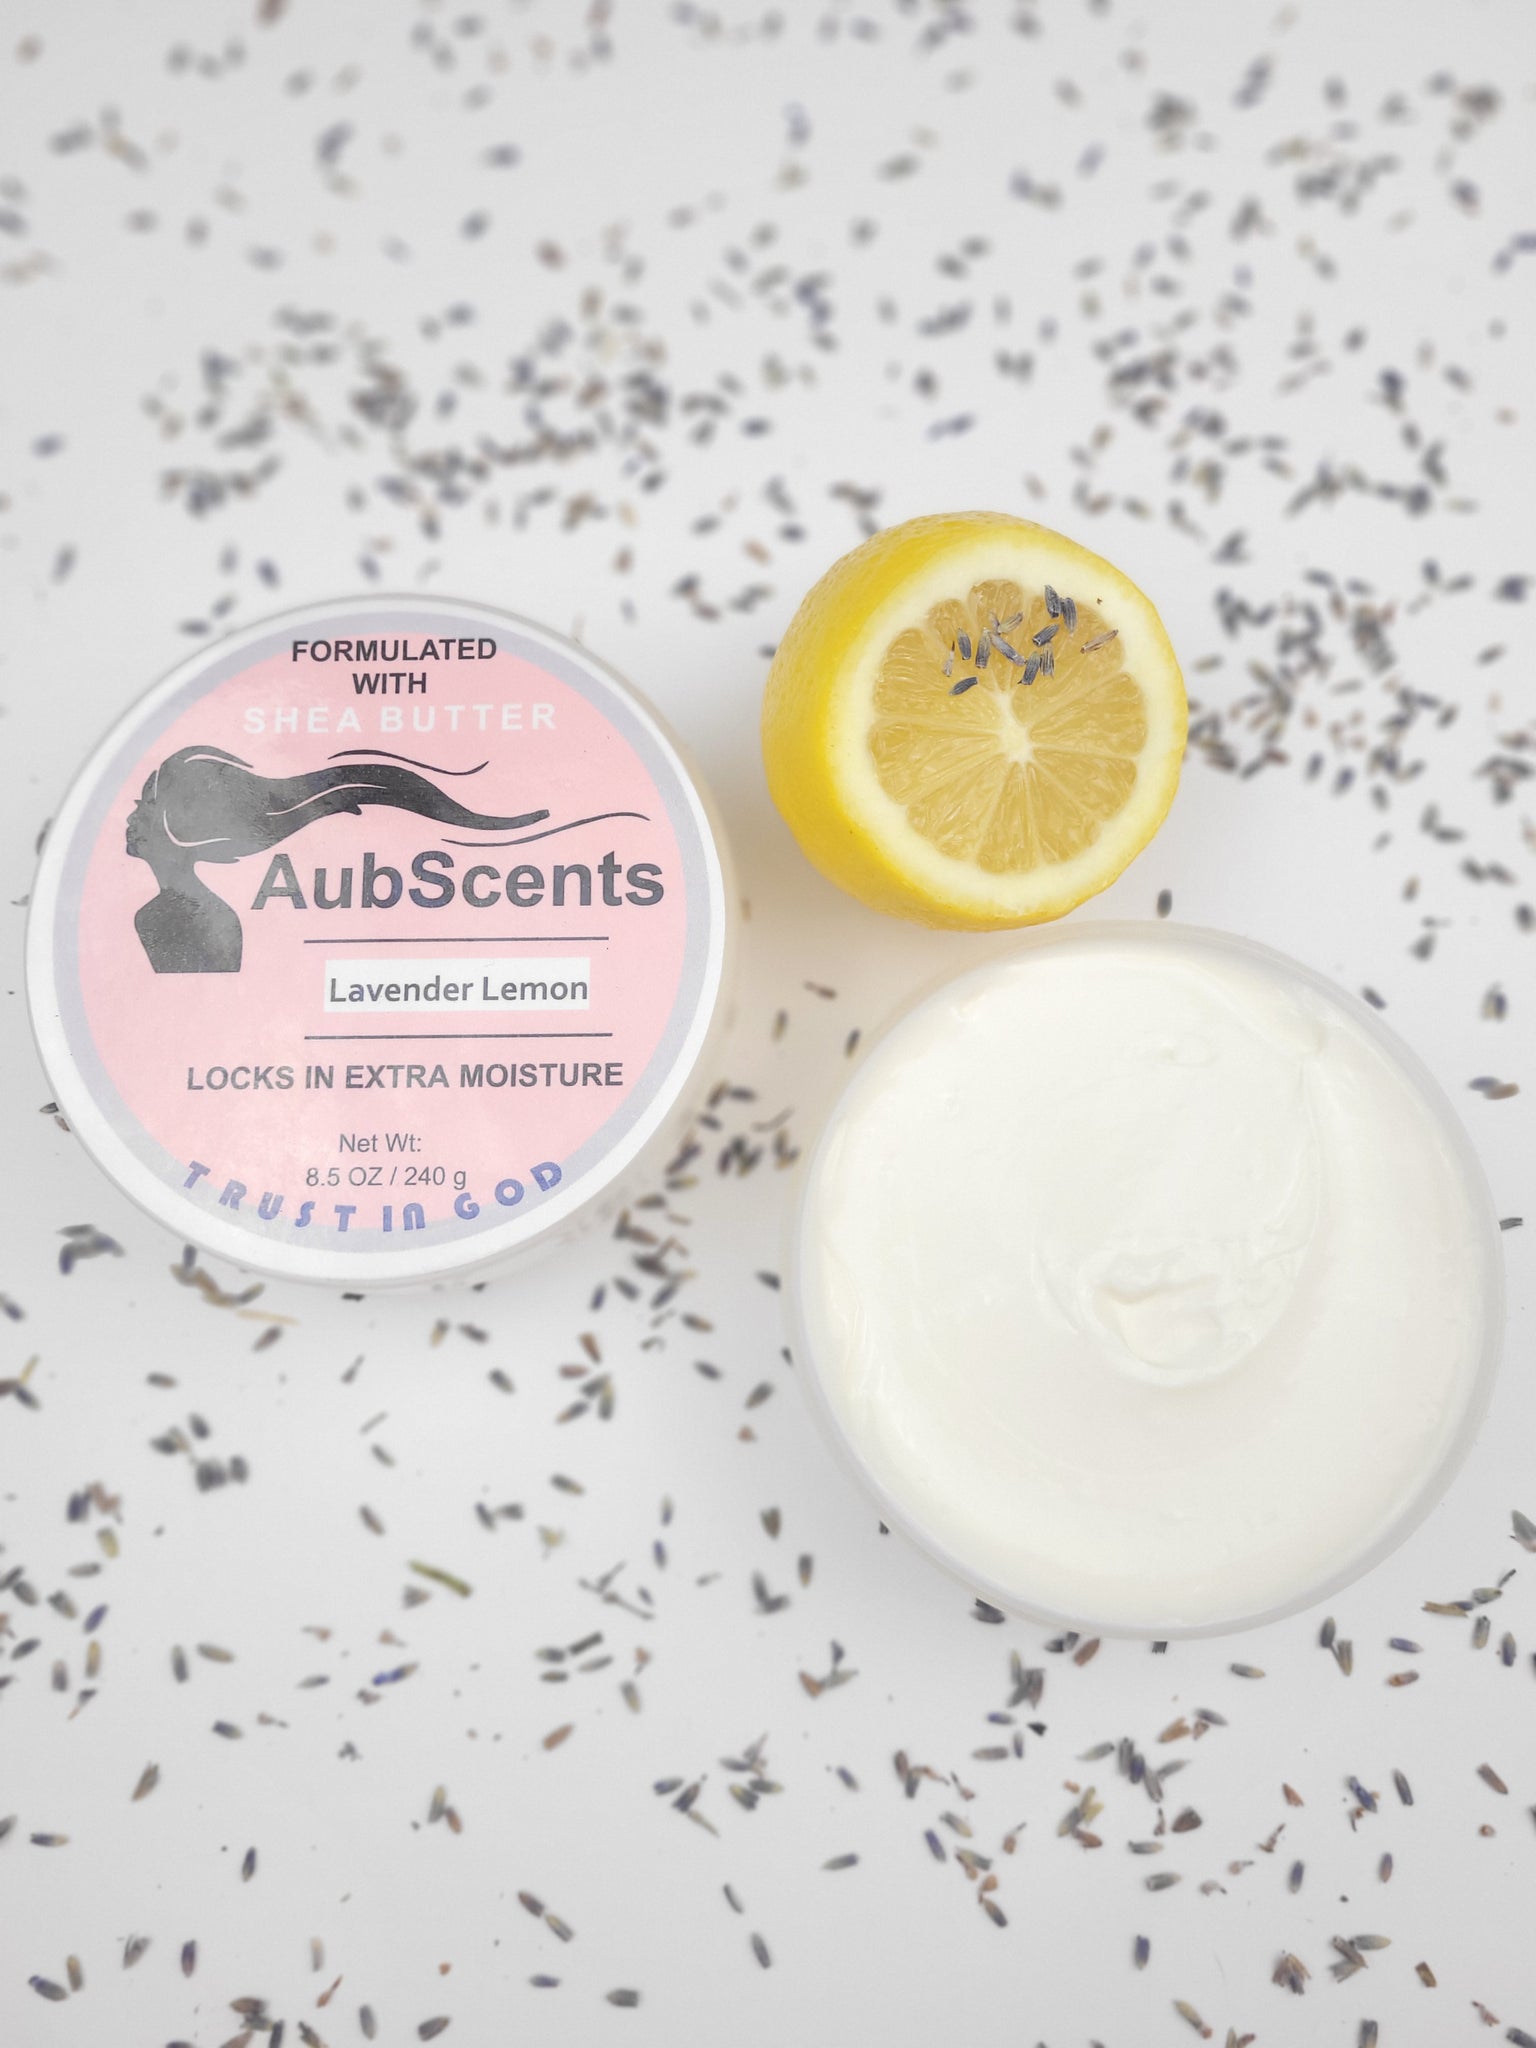 This Lavender Lemon body butter cream is formulated to provide intense hydration to effectively combat dry skin.